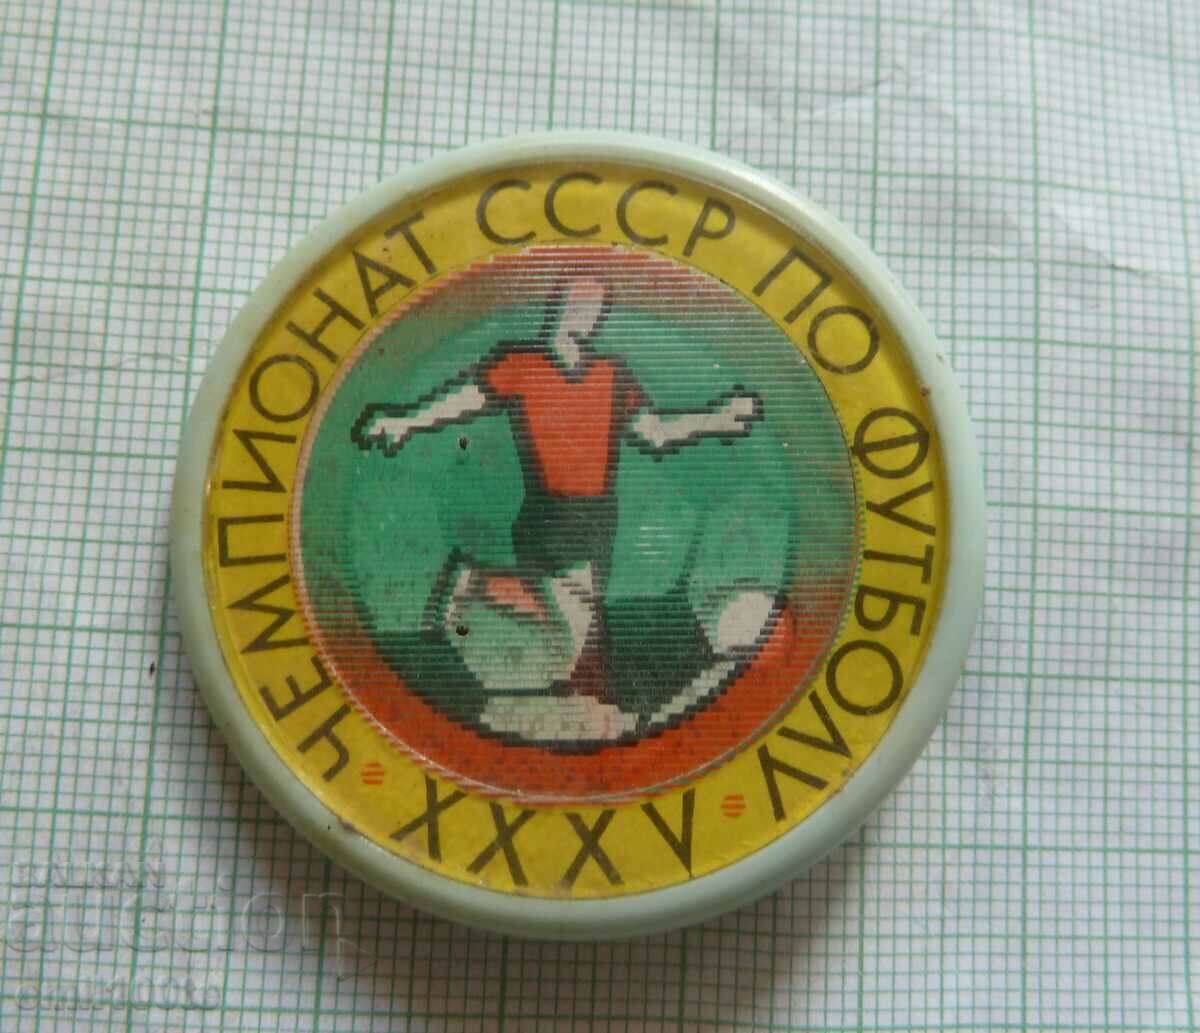 Badge - Football Championship of the USSR